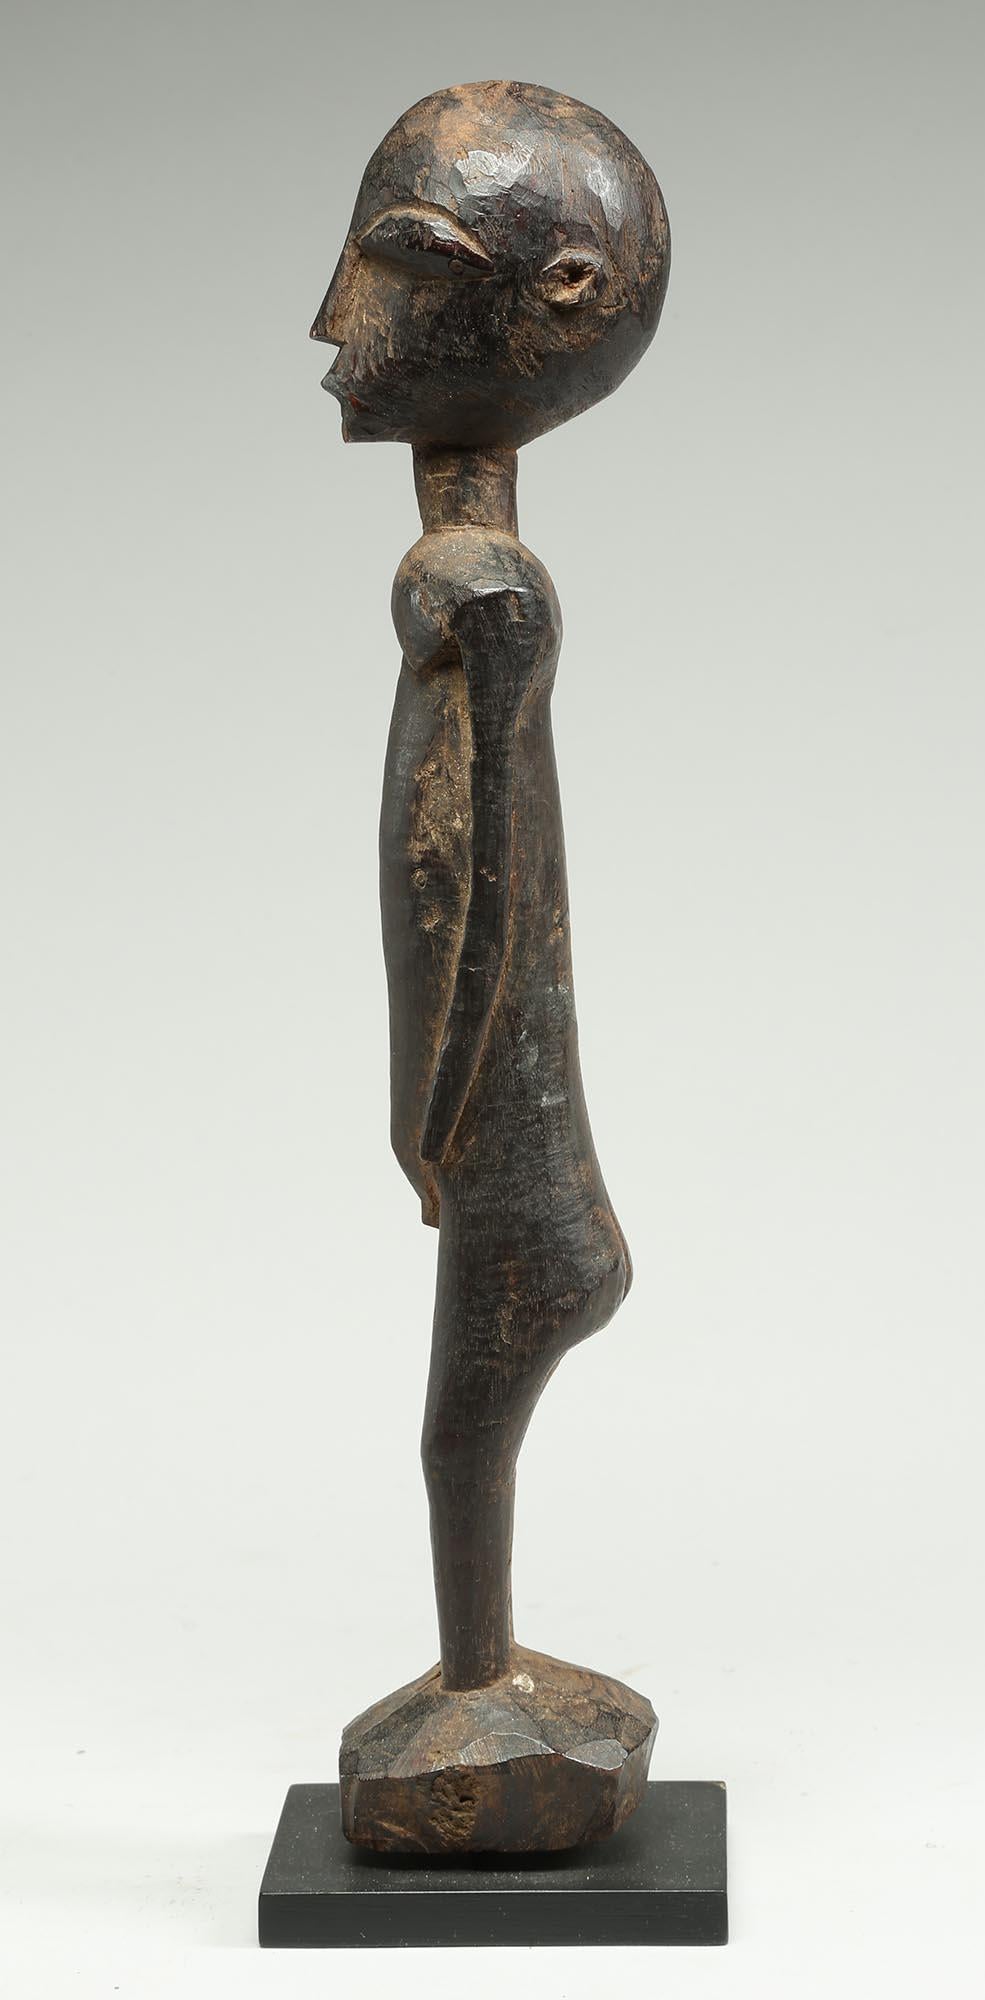 Hand-Carved Tall Elegant Standing Lobi Figure with Expressive Face, Early 20th Century Ghana